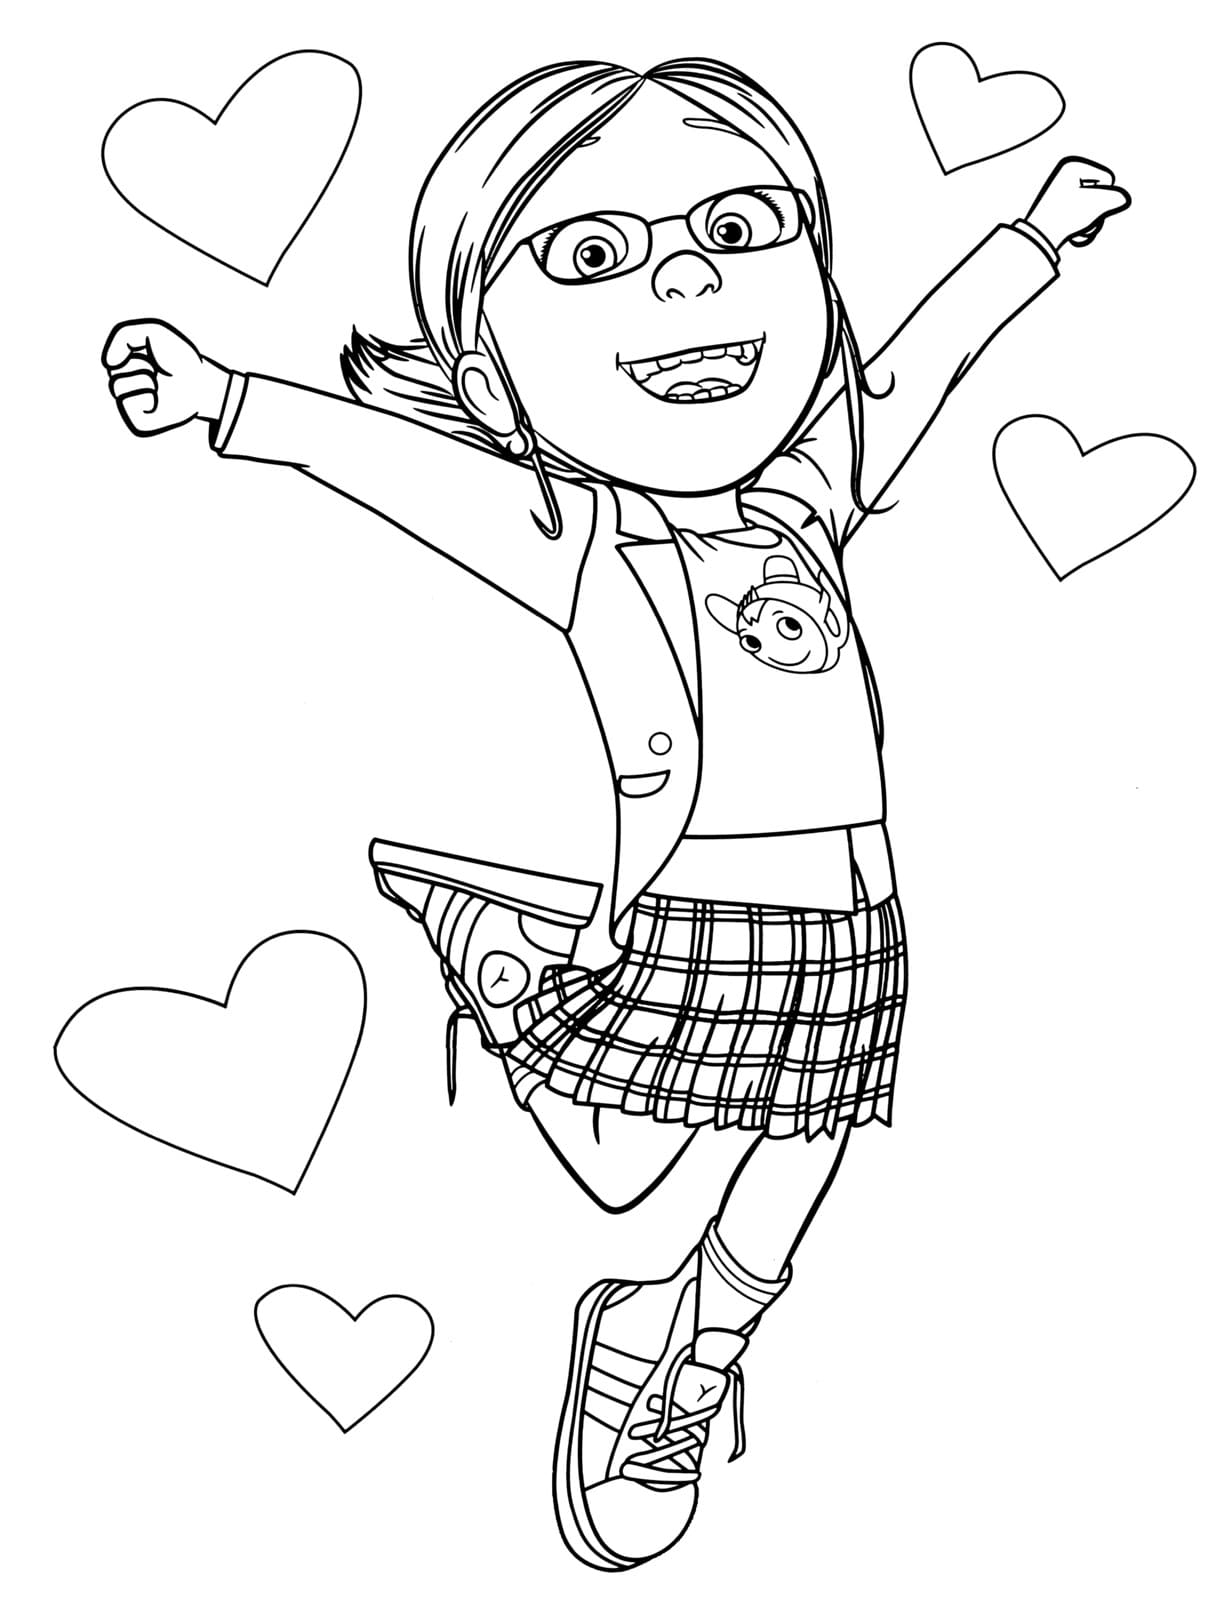 Despicable me Coloring Pages 90 Free Coloring Pages